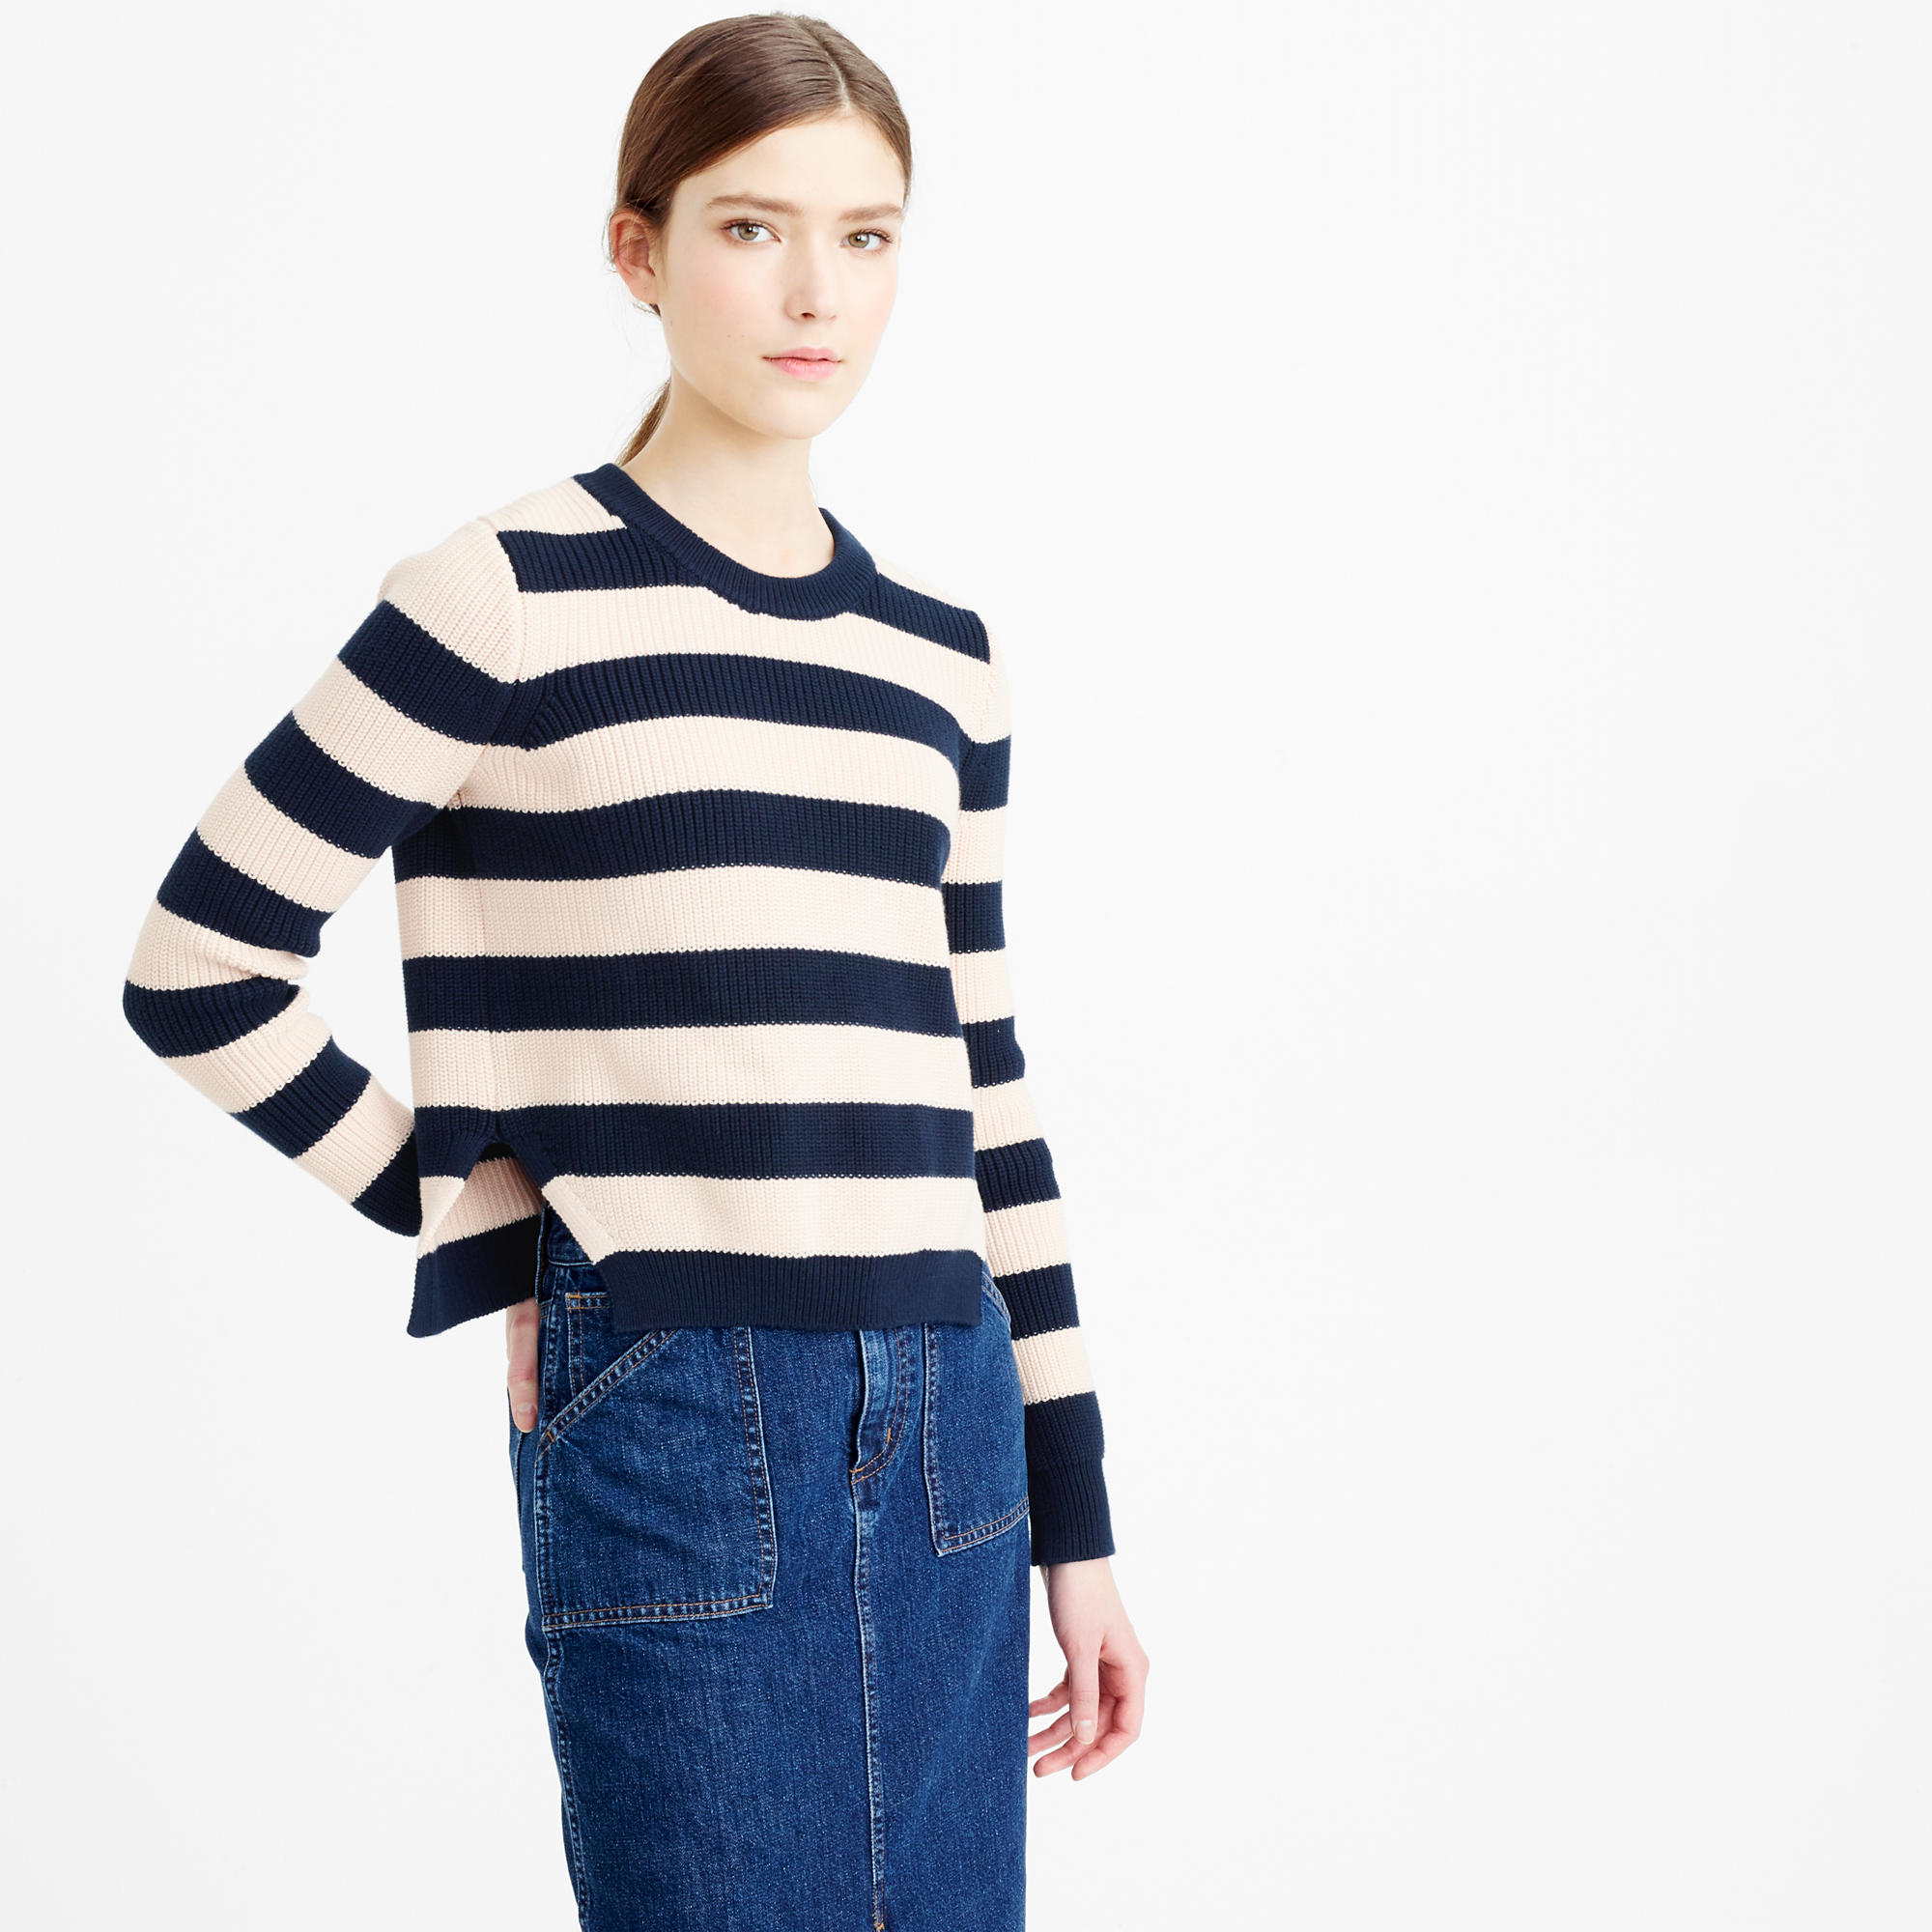 J.crew Cotton Striped Crewneck Sweater in Natural | Lyst